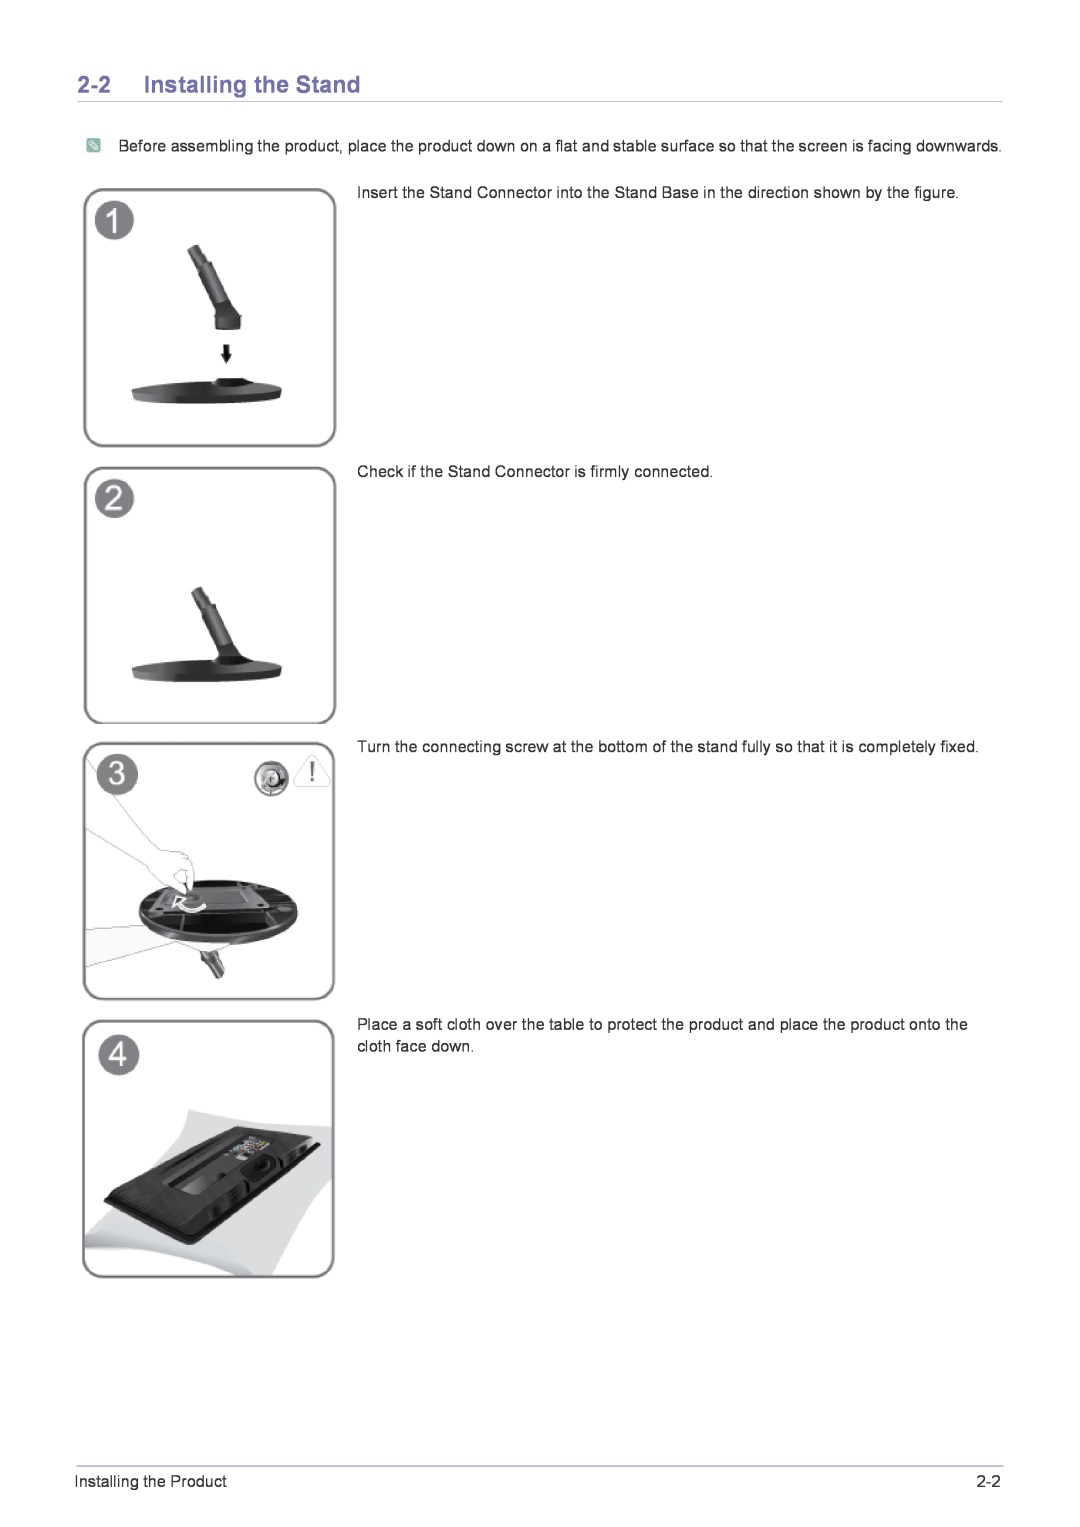 Samsung B2030HD, B2330HD, B2430HD, B1930HD, B2230HD user manual Installing the Stand 